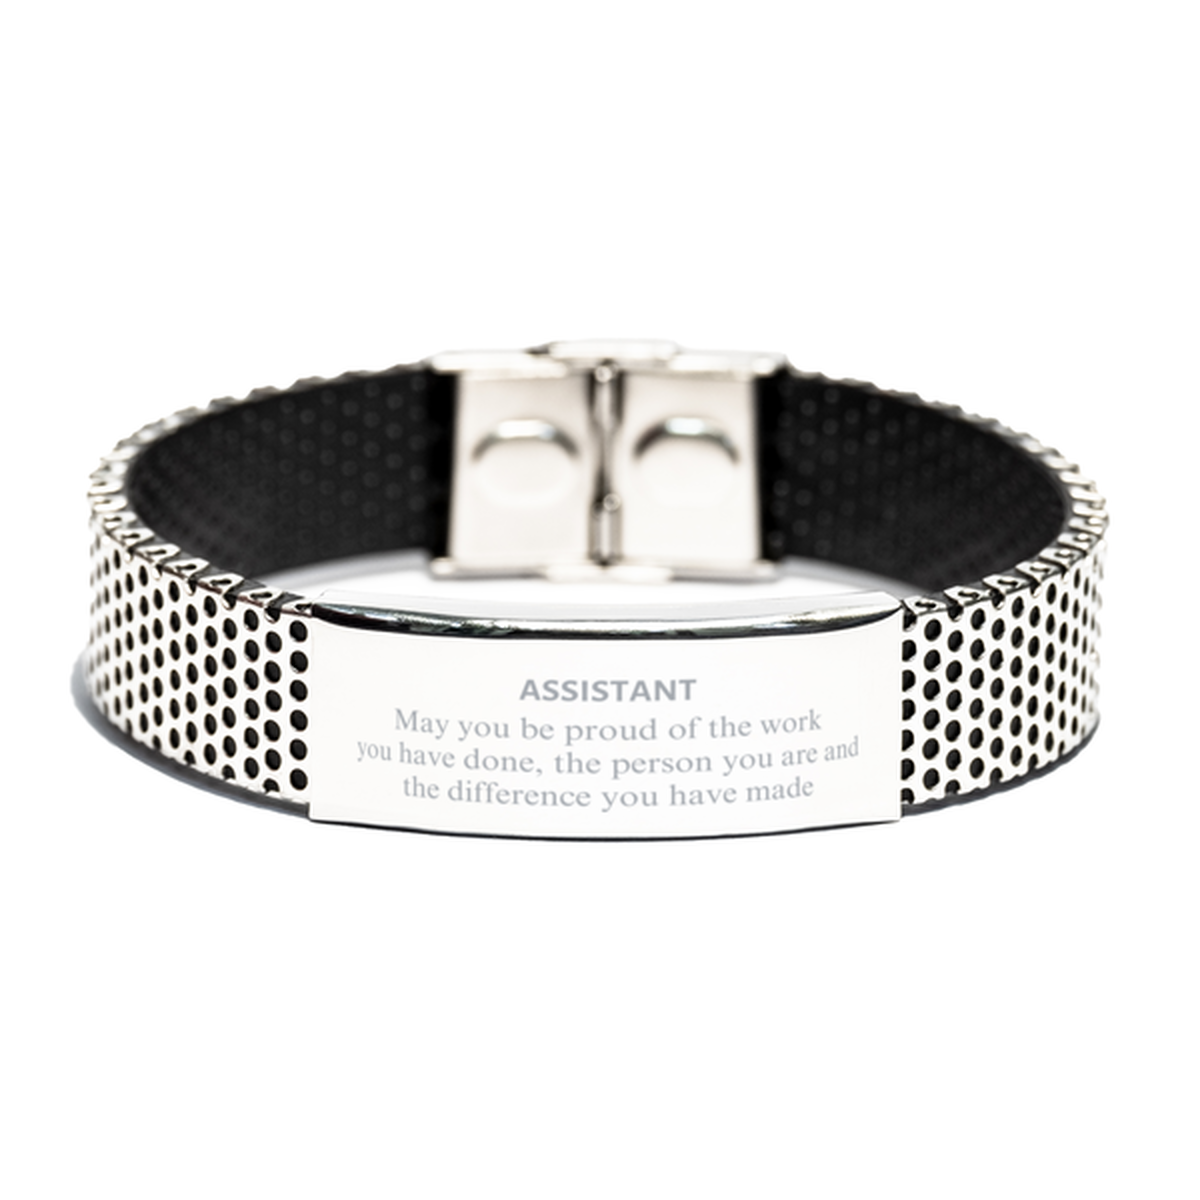 Assistant May you be proud of the work you have done, Retirement Assistant Stainless Steel Bracelet for Colleague Appreciation Gifts Amazing for Assistant